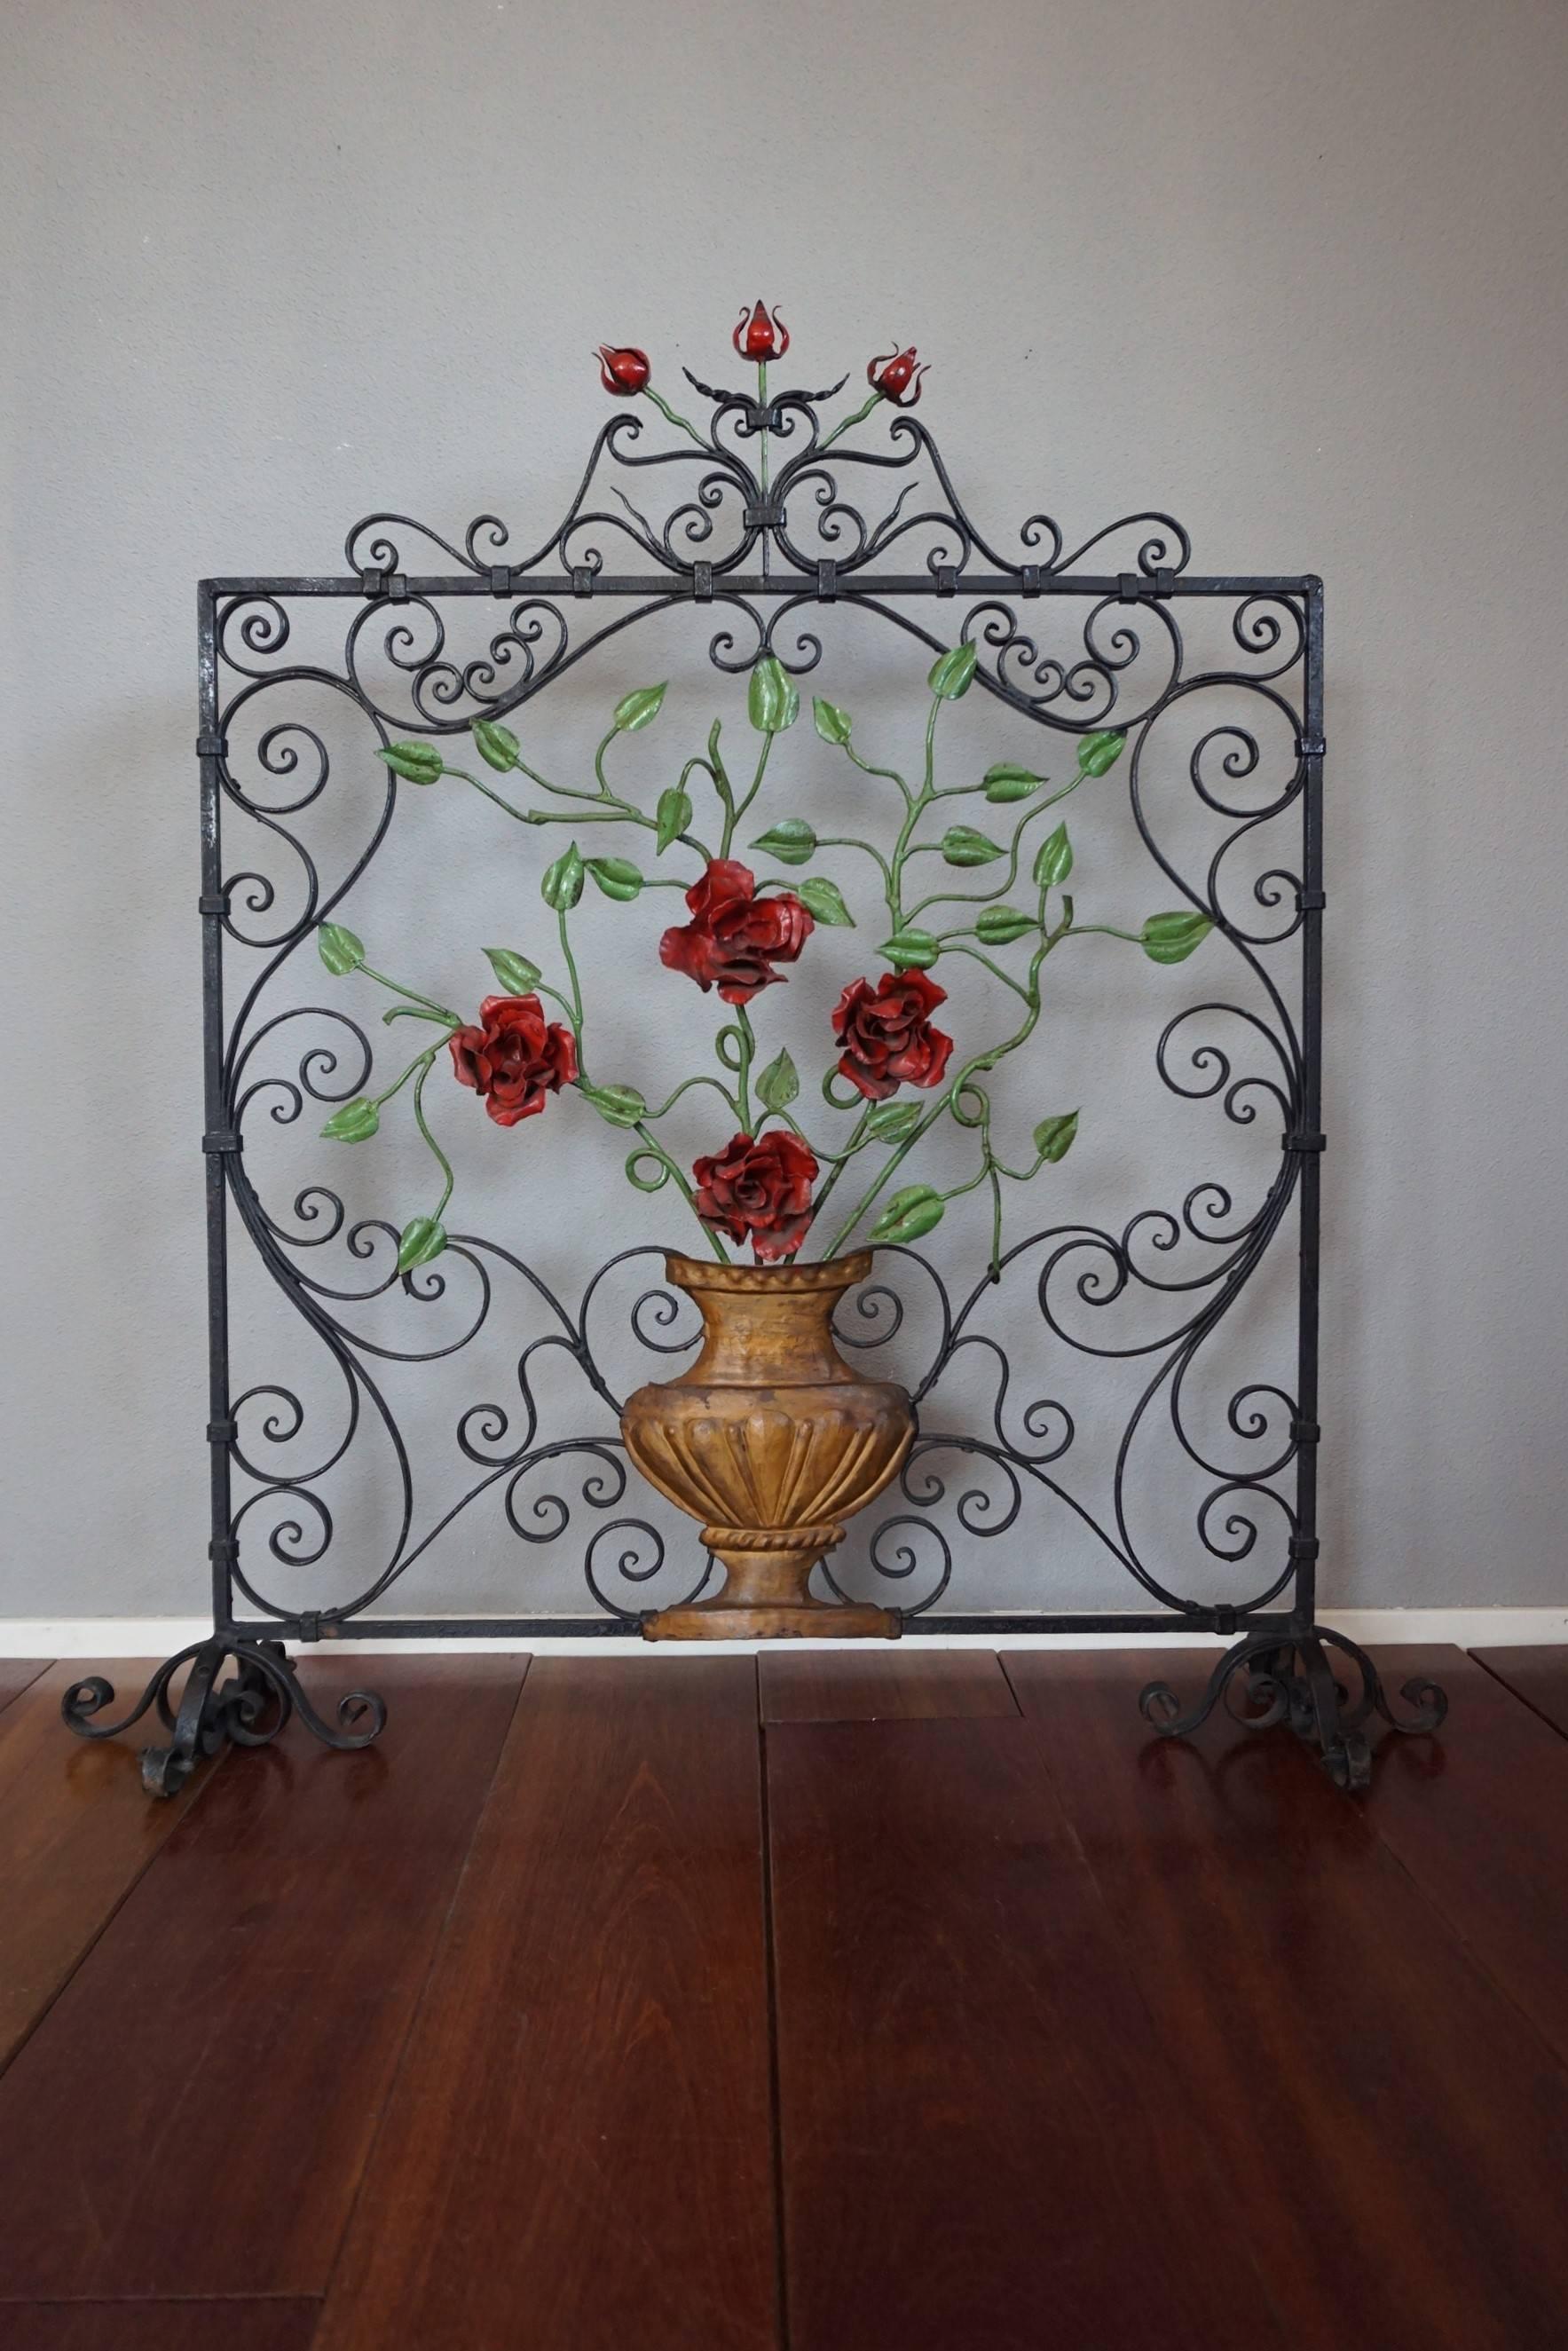 Early 20th Century Handcrafted Wrought Iron Firescreen with Roses in Vase Decor 8